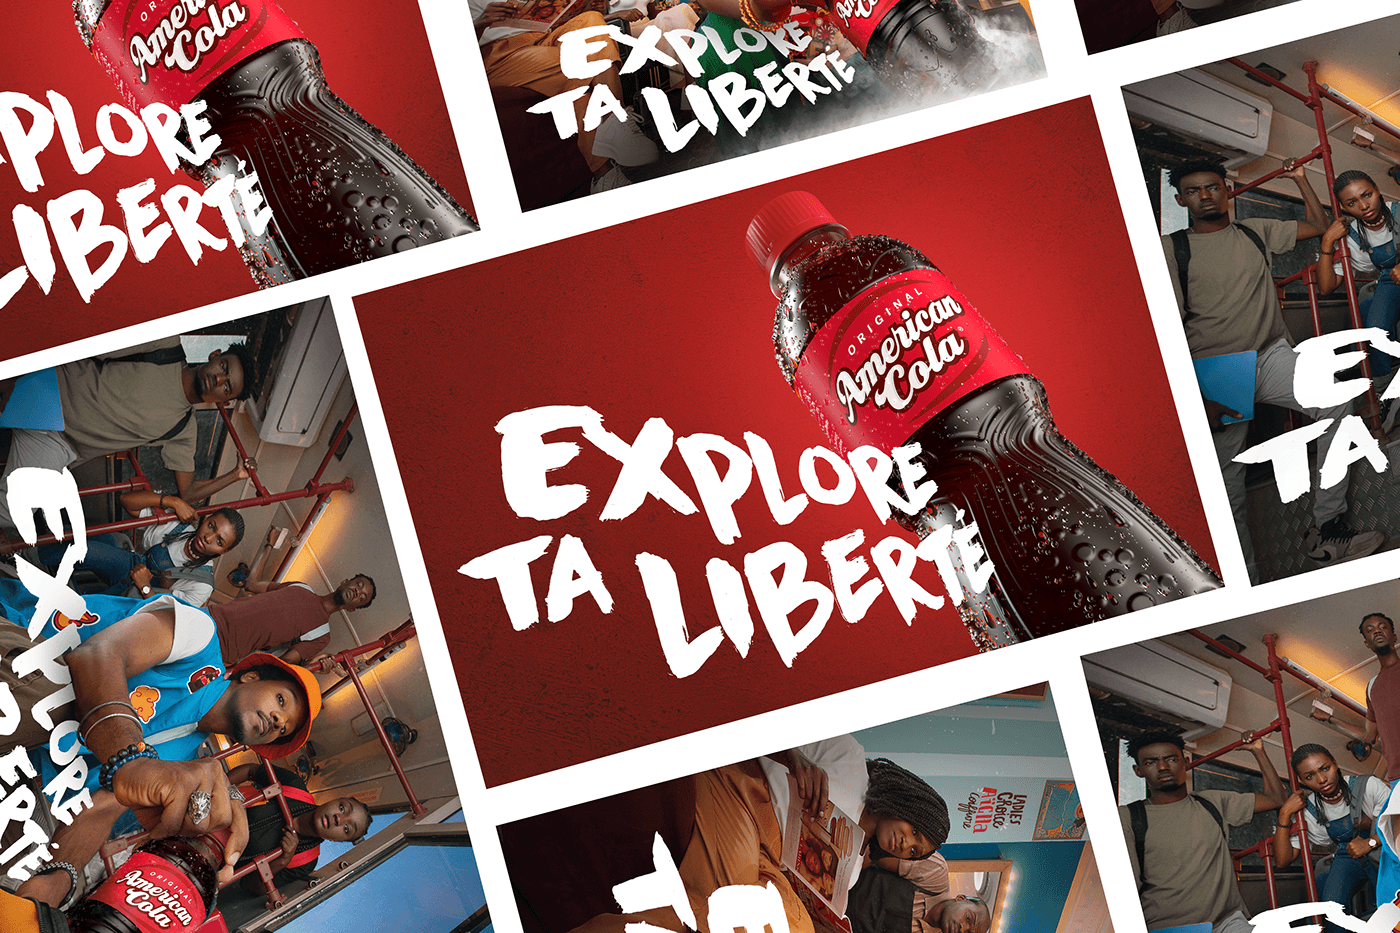 senegal africa Advertising  campaign drink campagne publicitaire print american cola